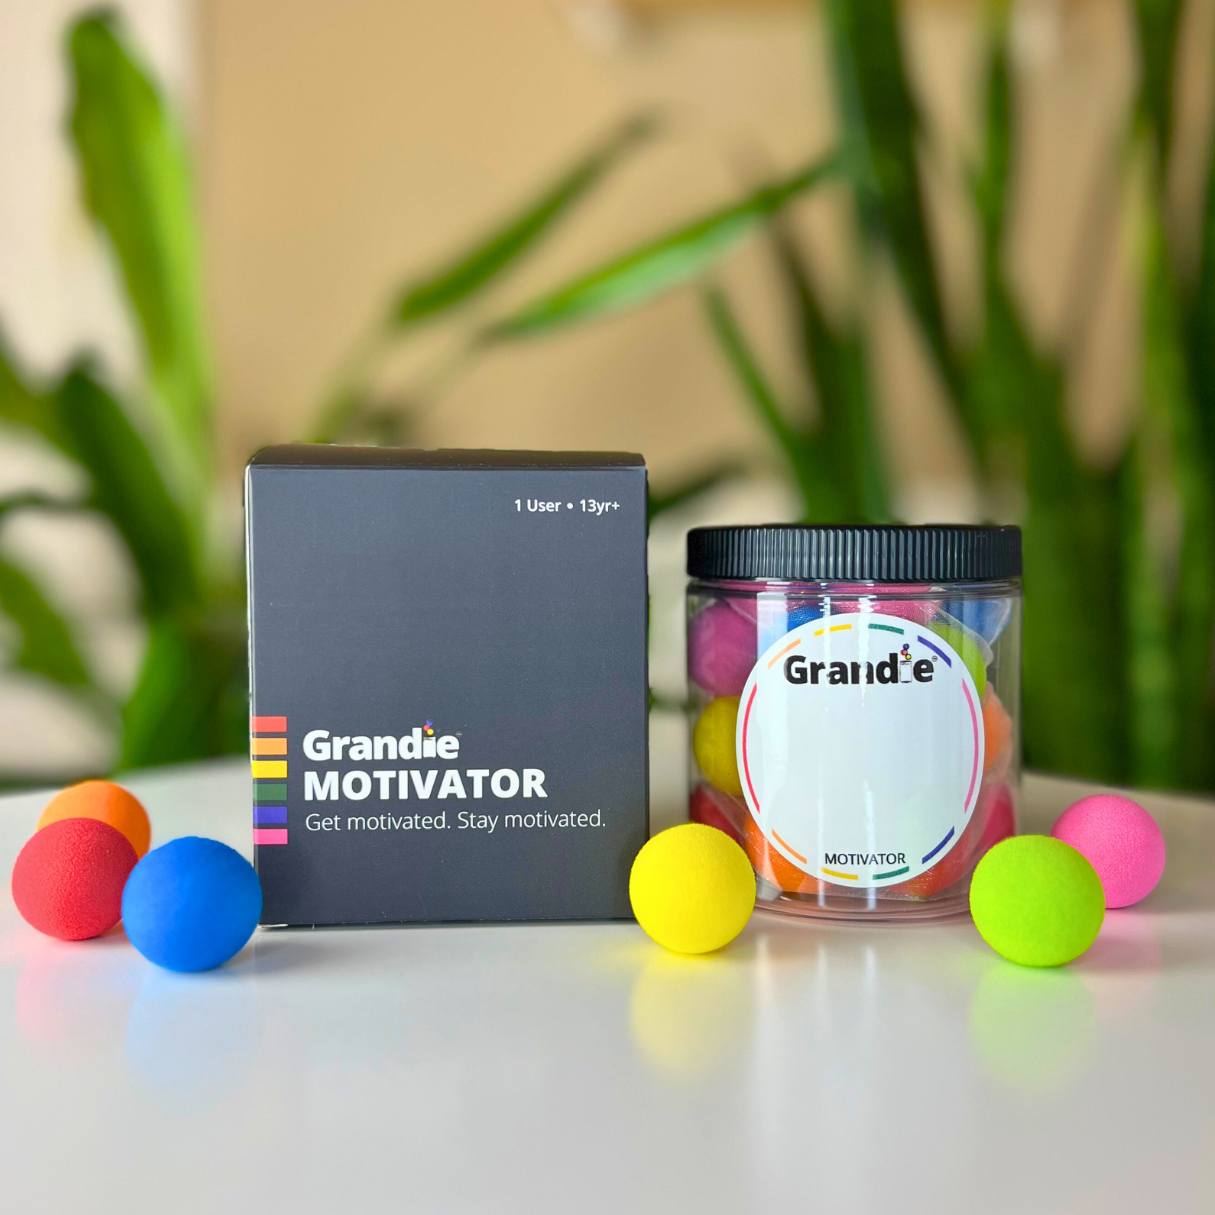 Image of the Grandie Motivator Jar and it's retail box